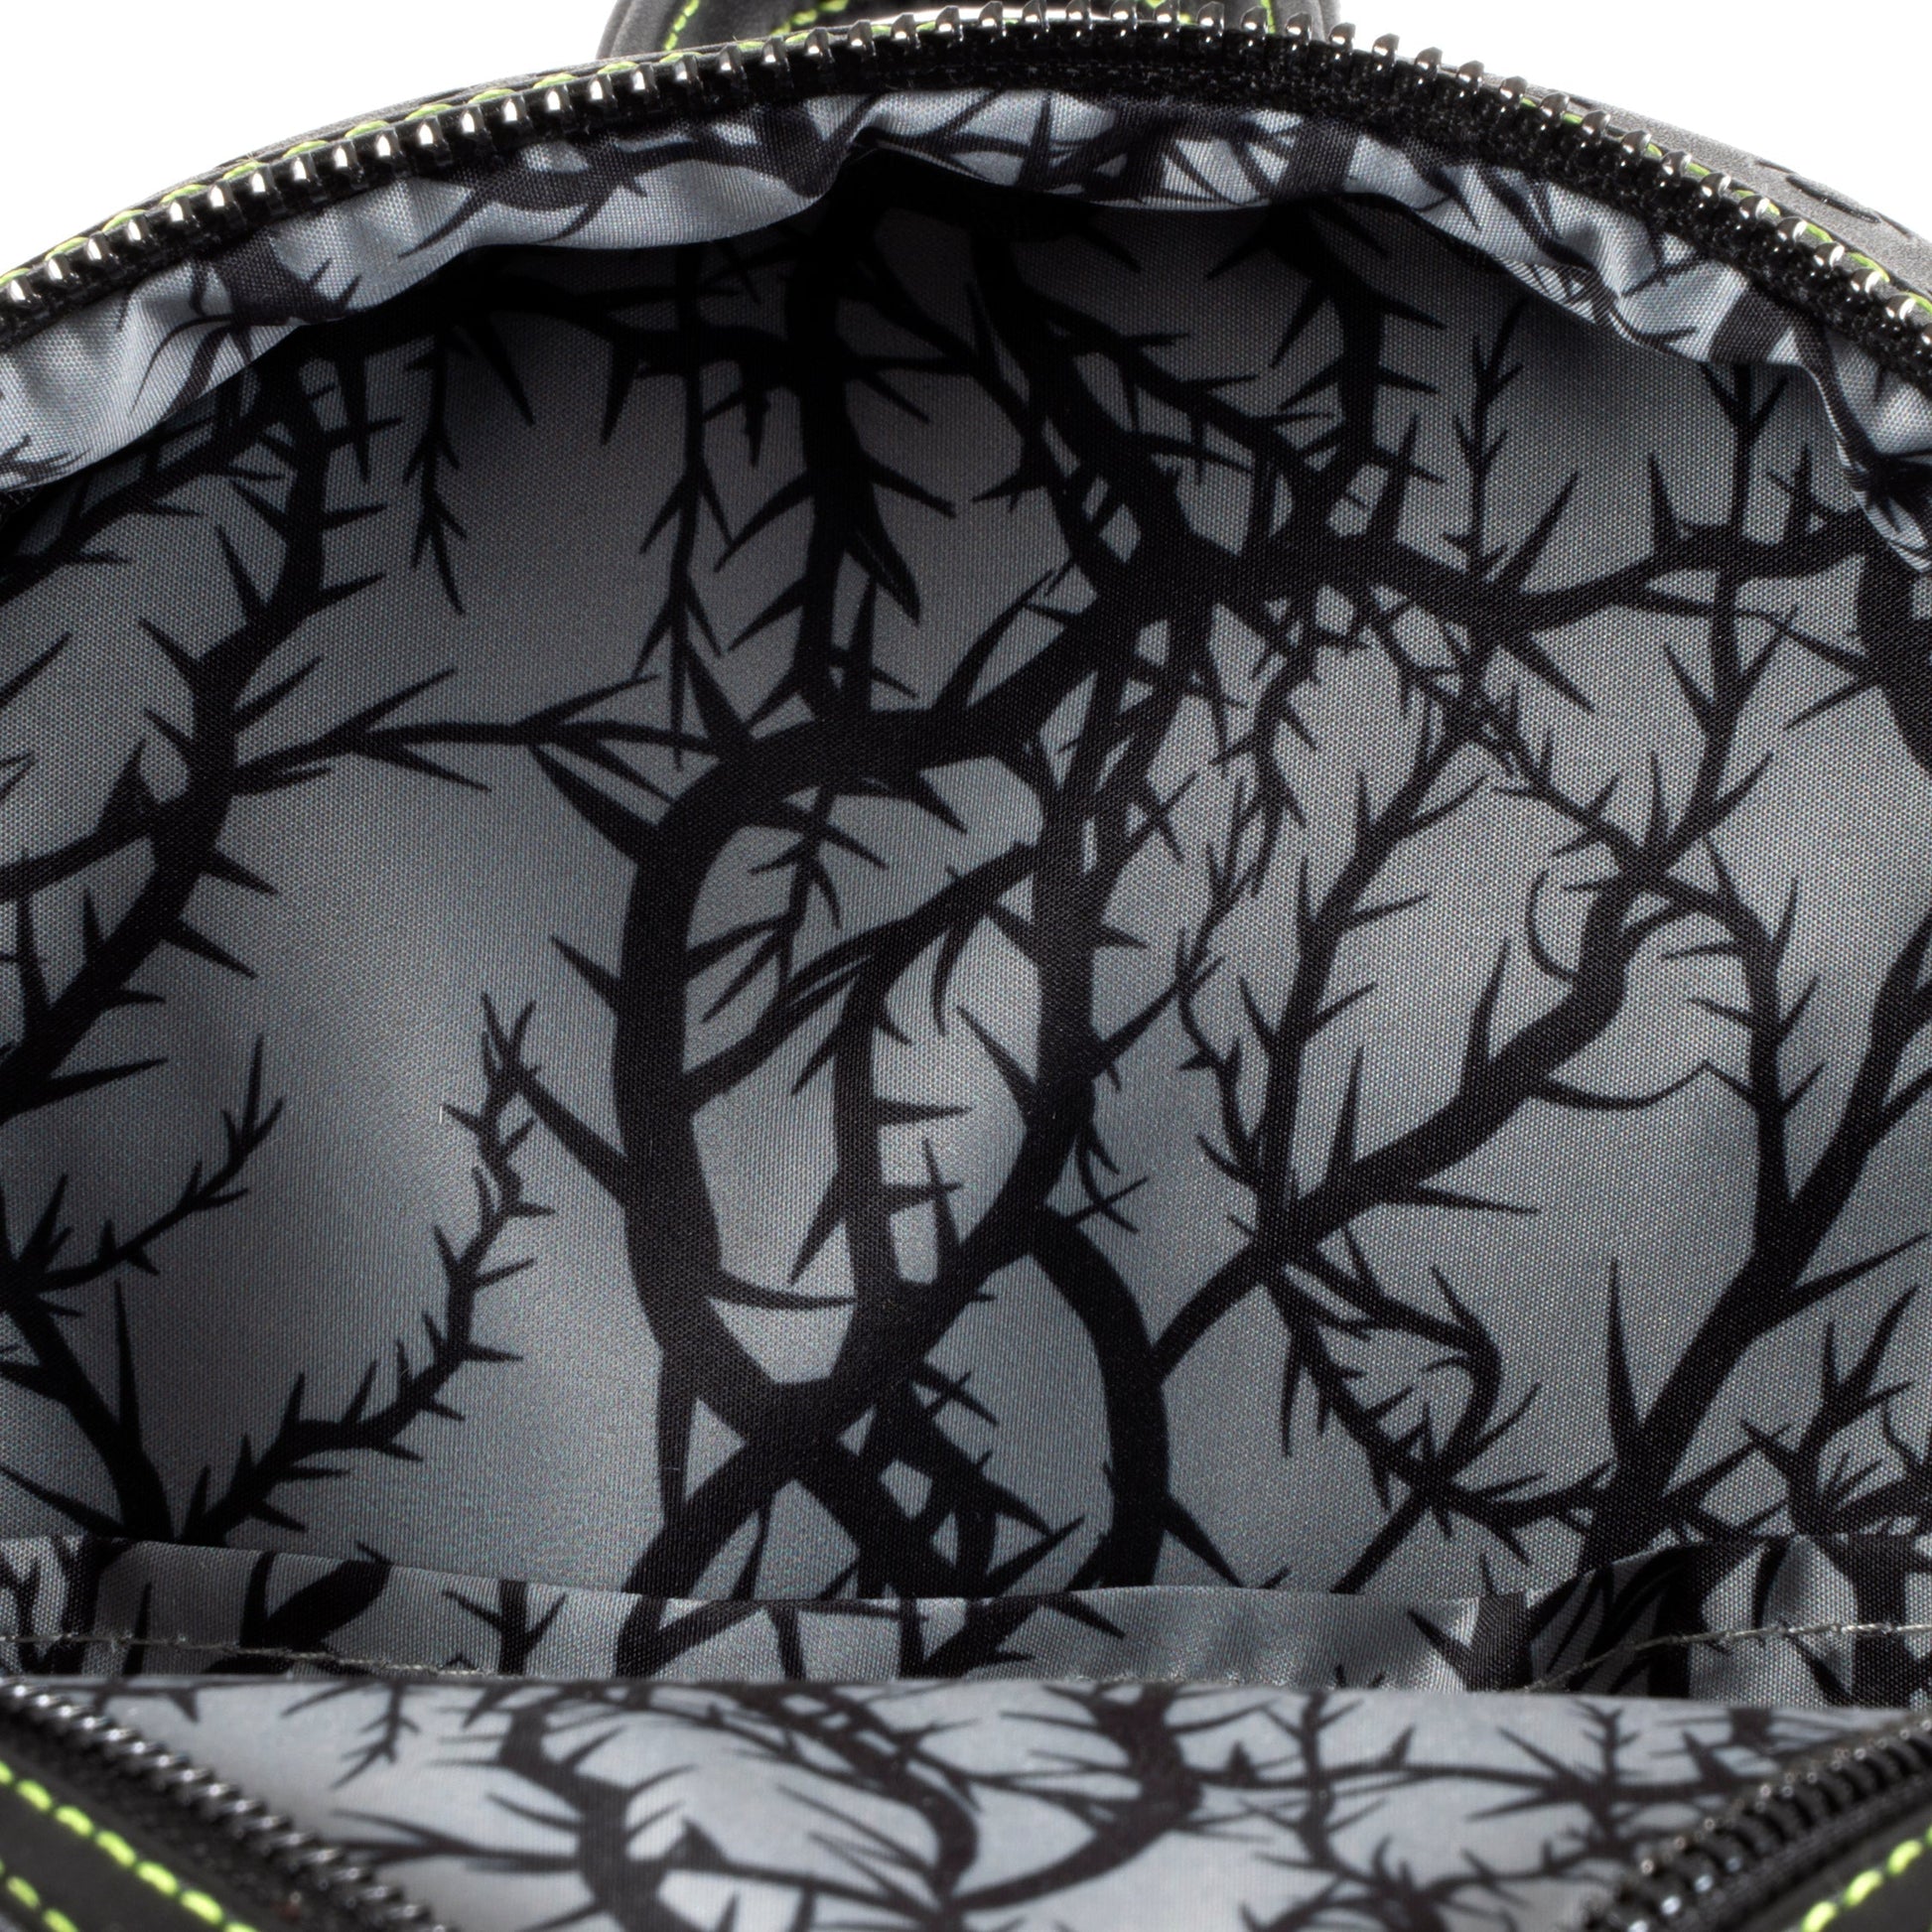 PREORDER EIGHT3FIVE x Loungefly Exclusive Disney Maleficent Mini Backpack Backpacks Loungefly 